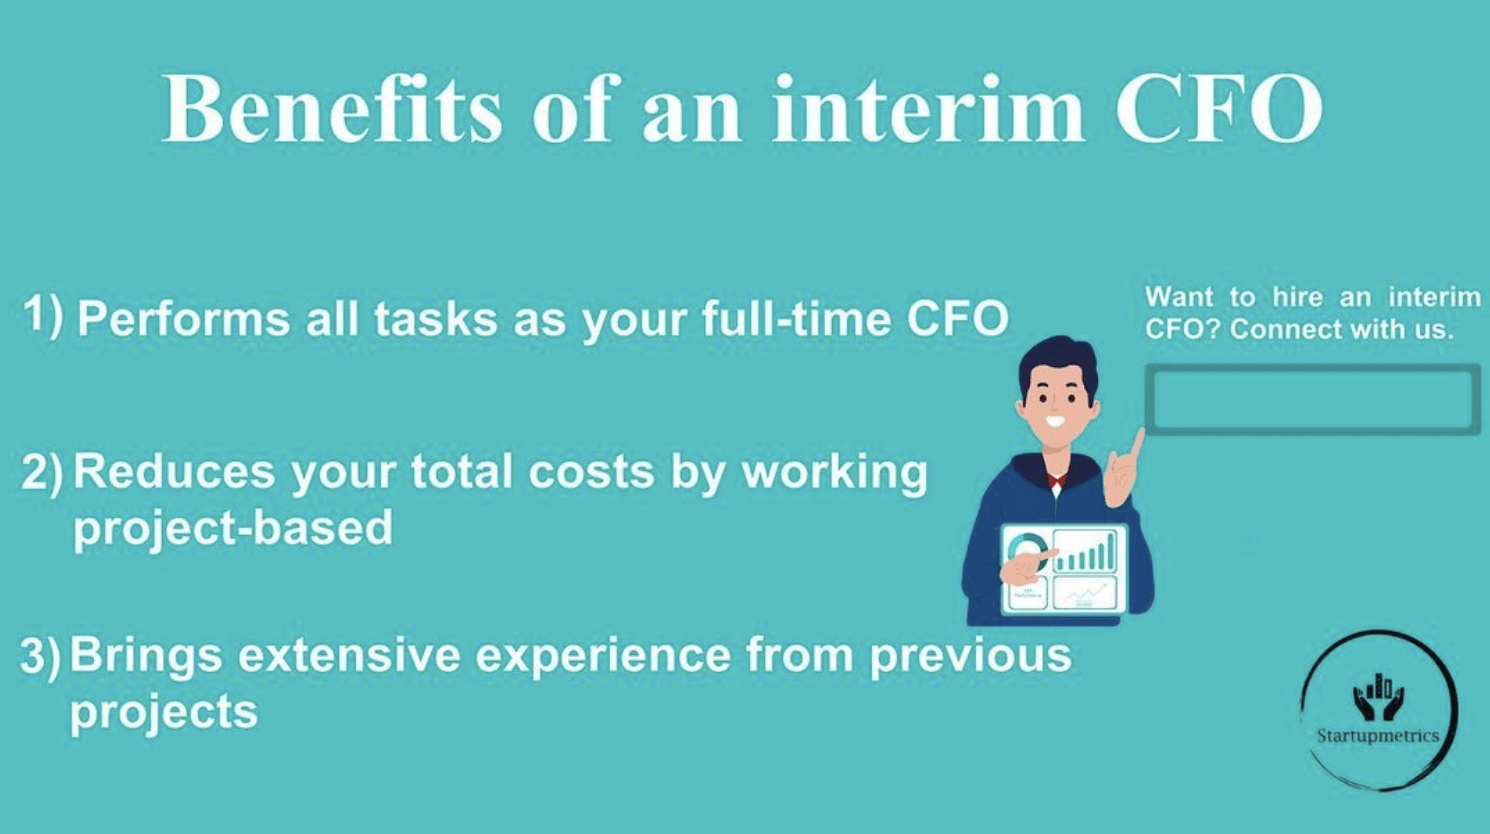 Should your startup hire an interim CFO over a full-time CFO?